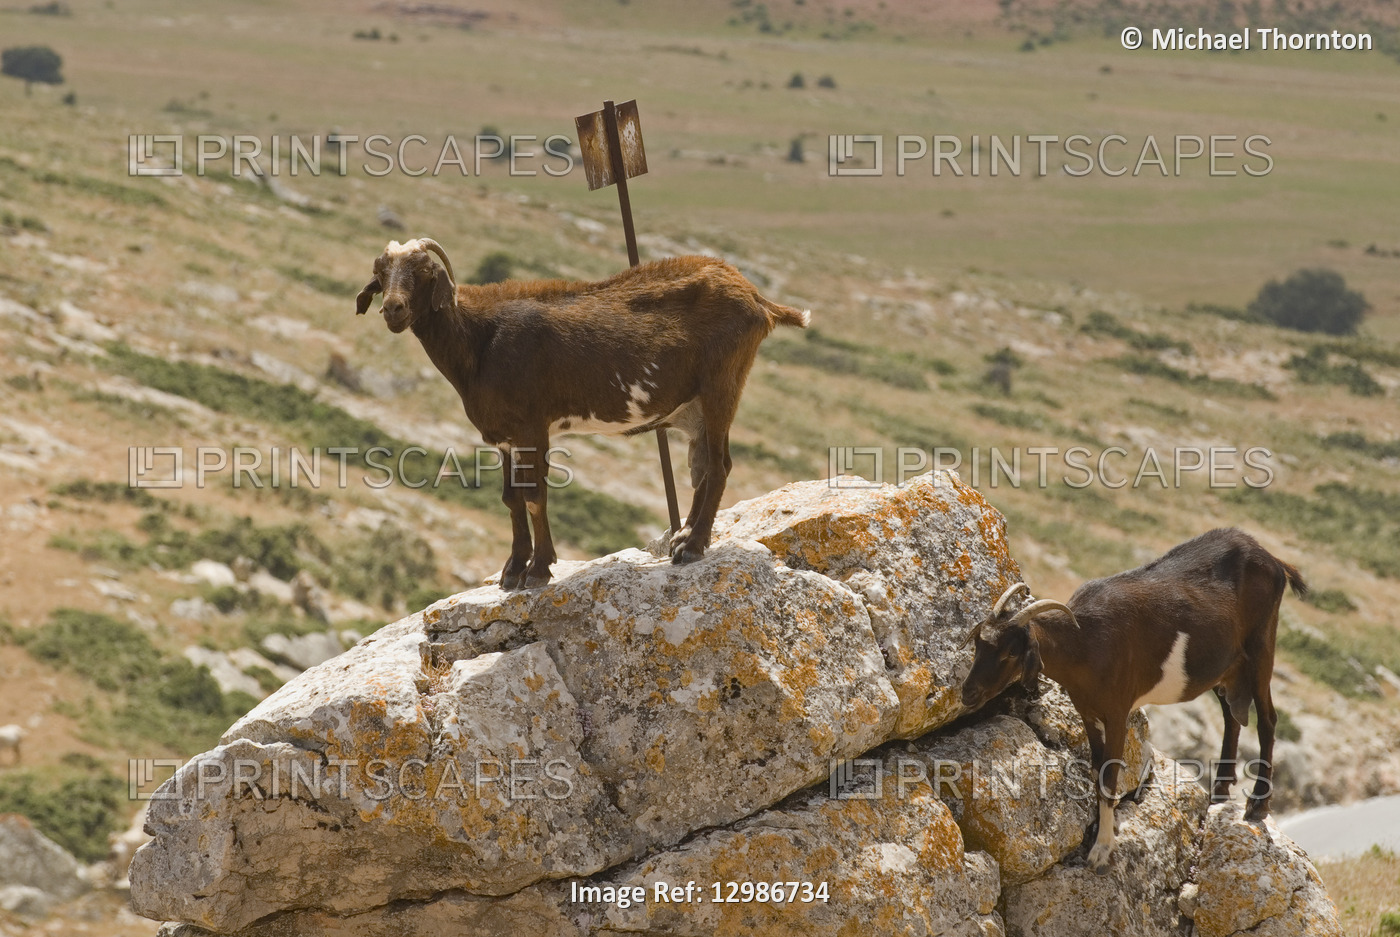 Goats in Andalucia, Spain.